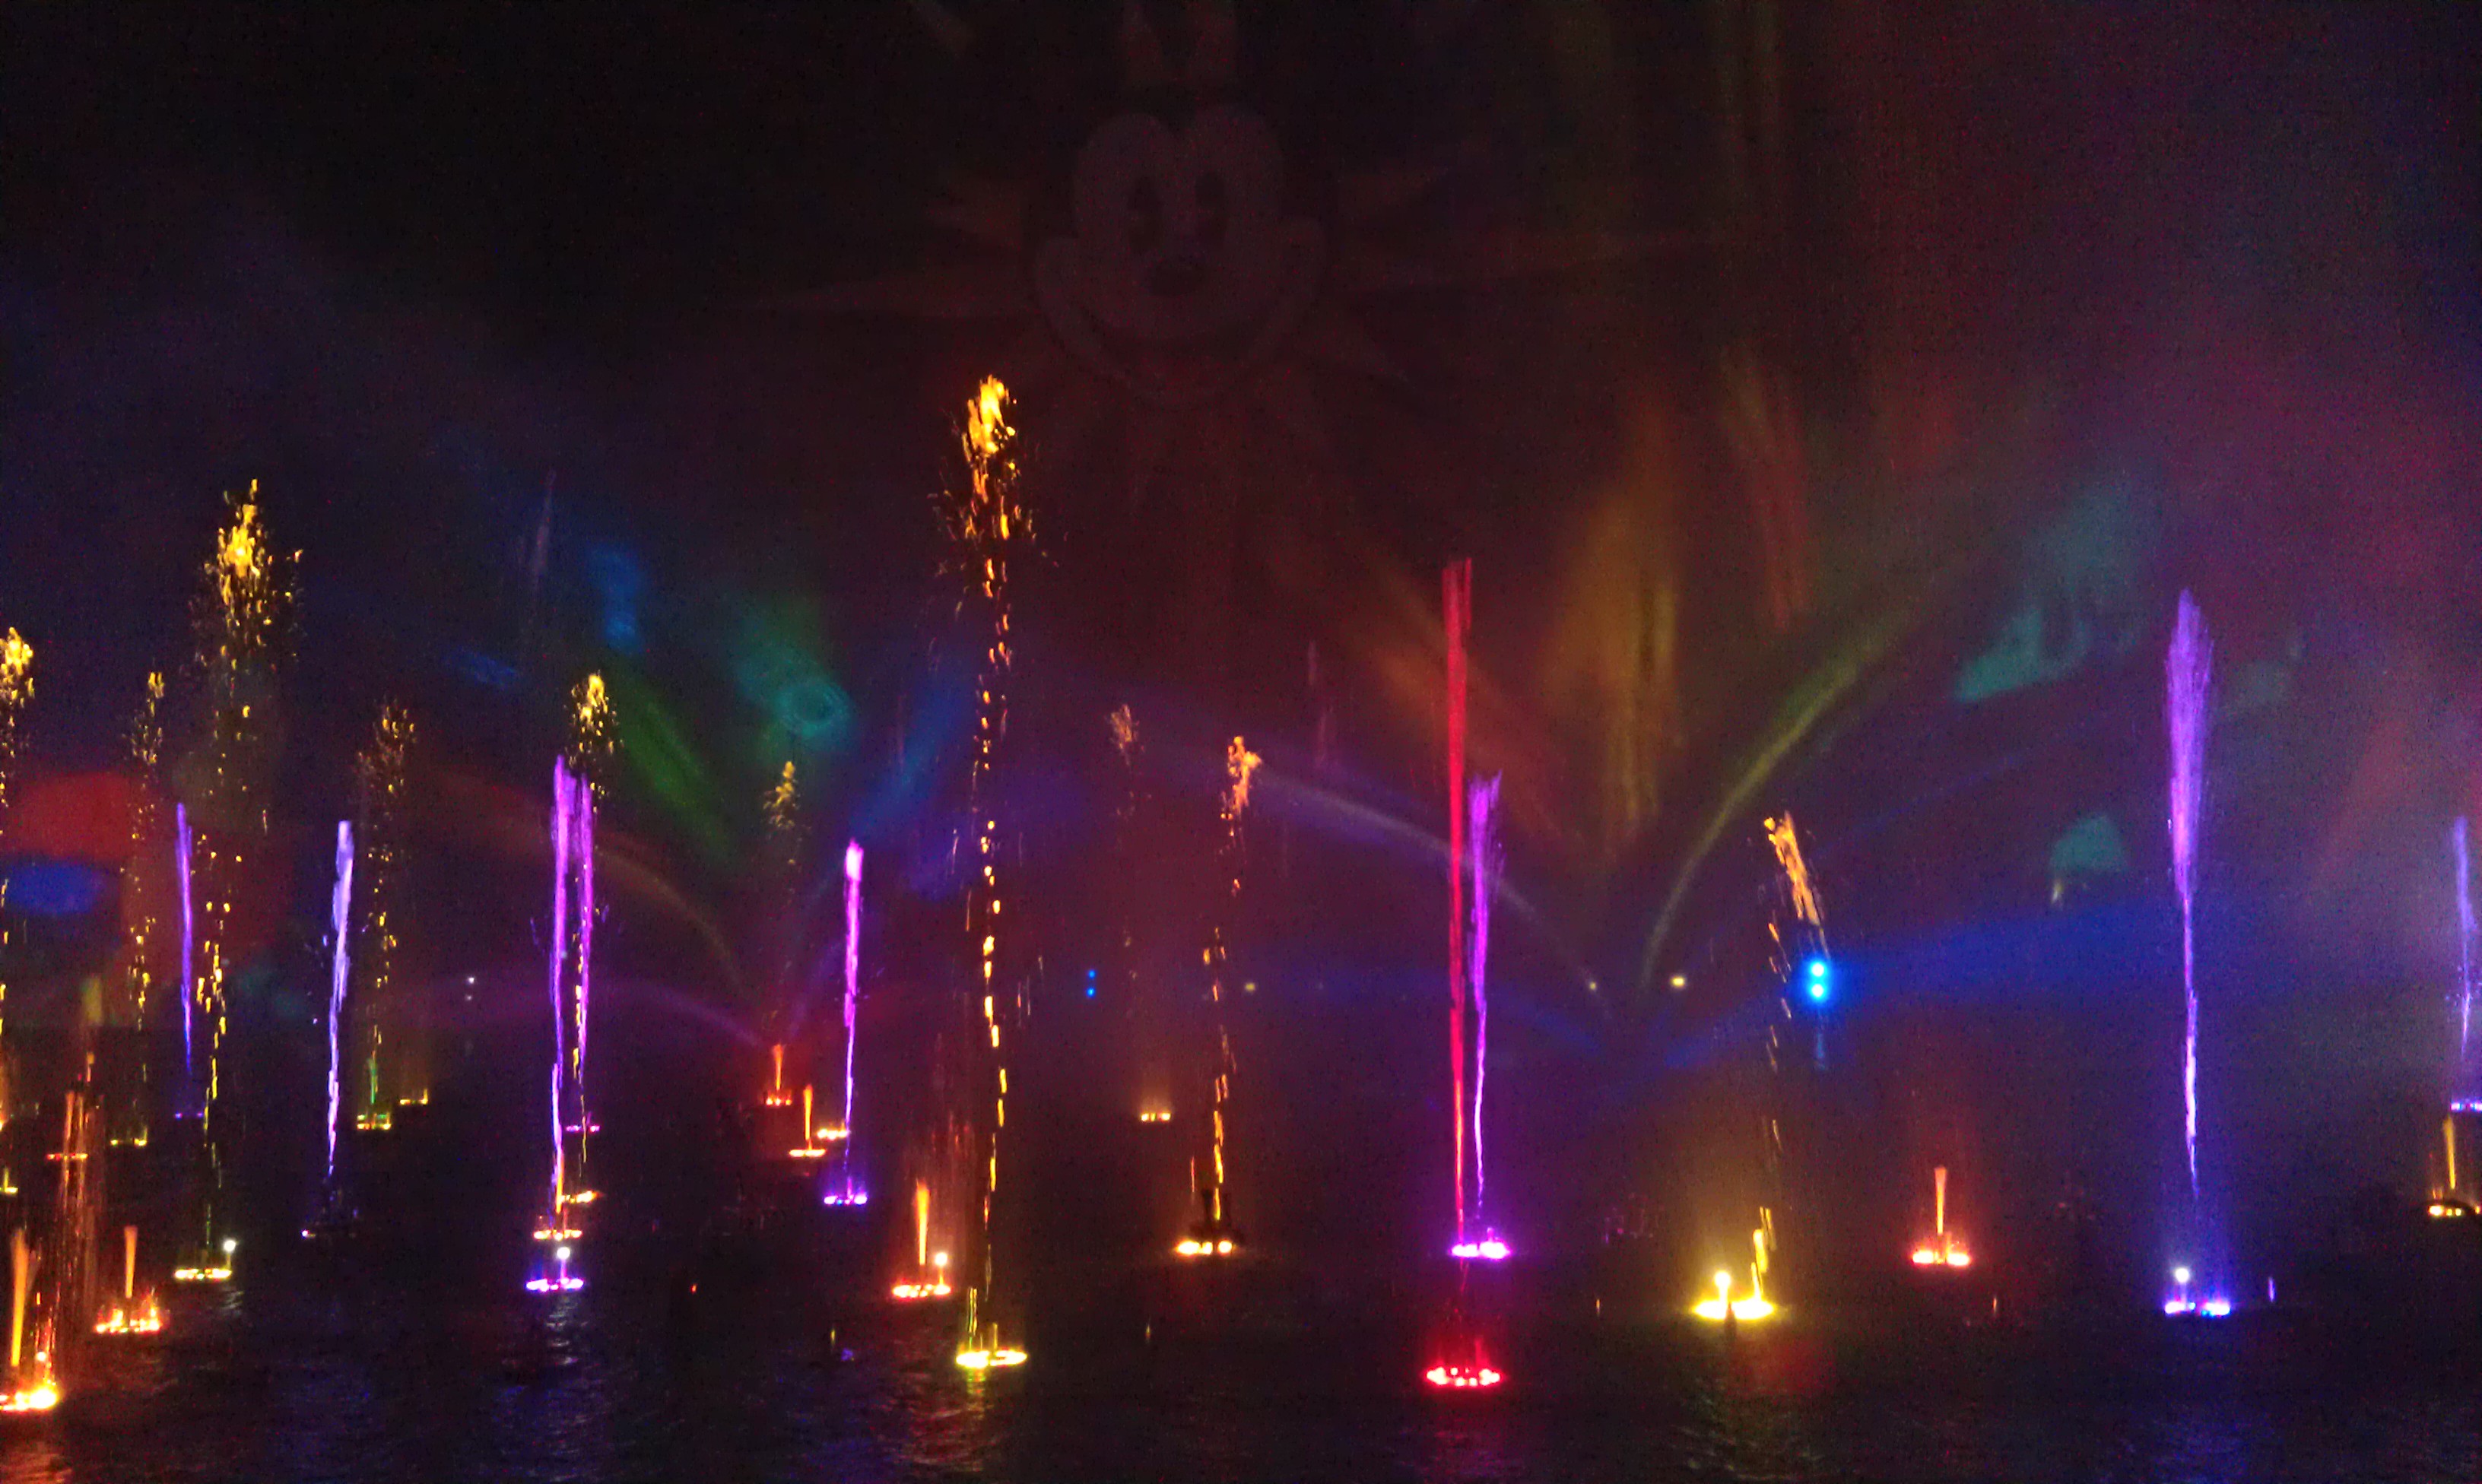 The colors in the sky during World of Color